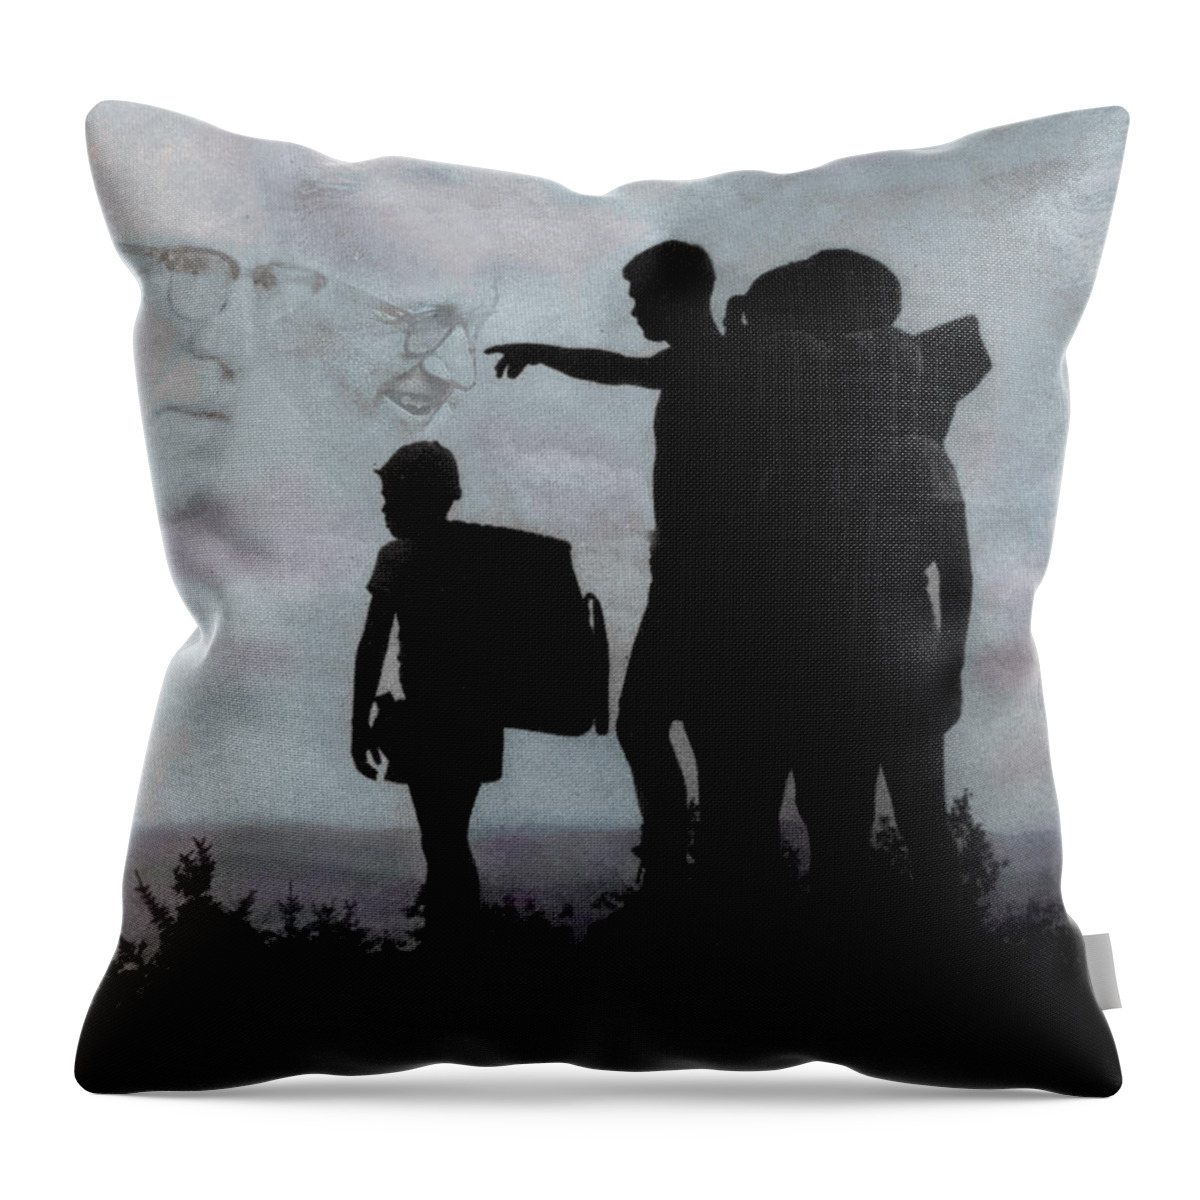 Call Throw Pillow featuring the photograph The Call Centennial Cover Image by Wayne King